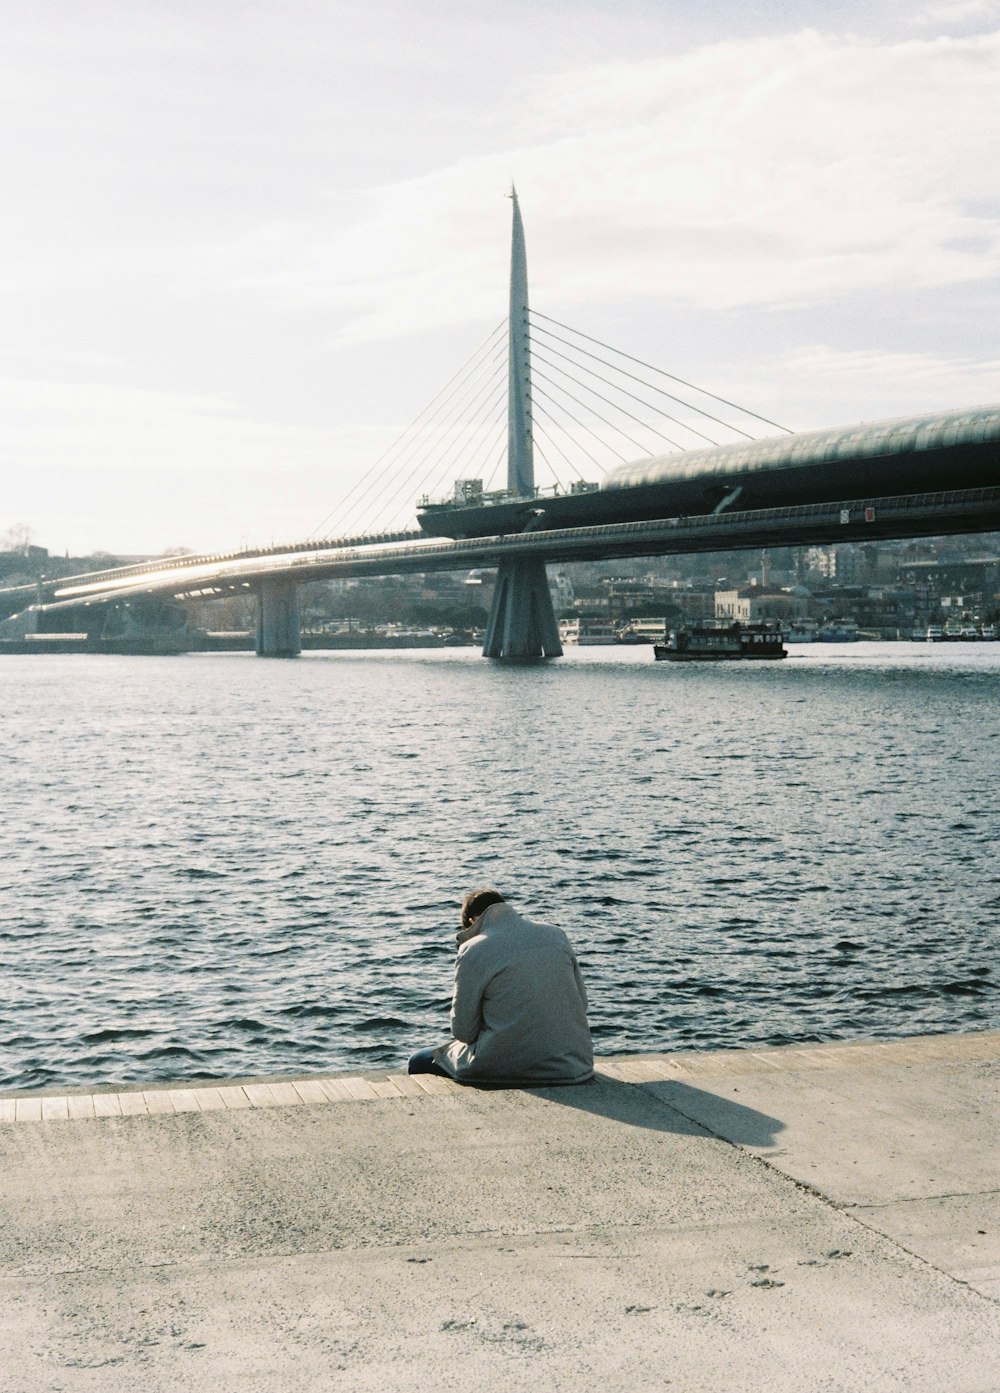 a man sitting on the ground next to a body of water